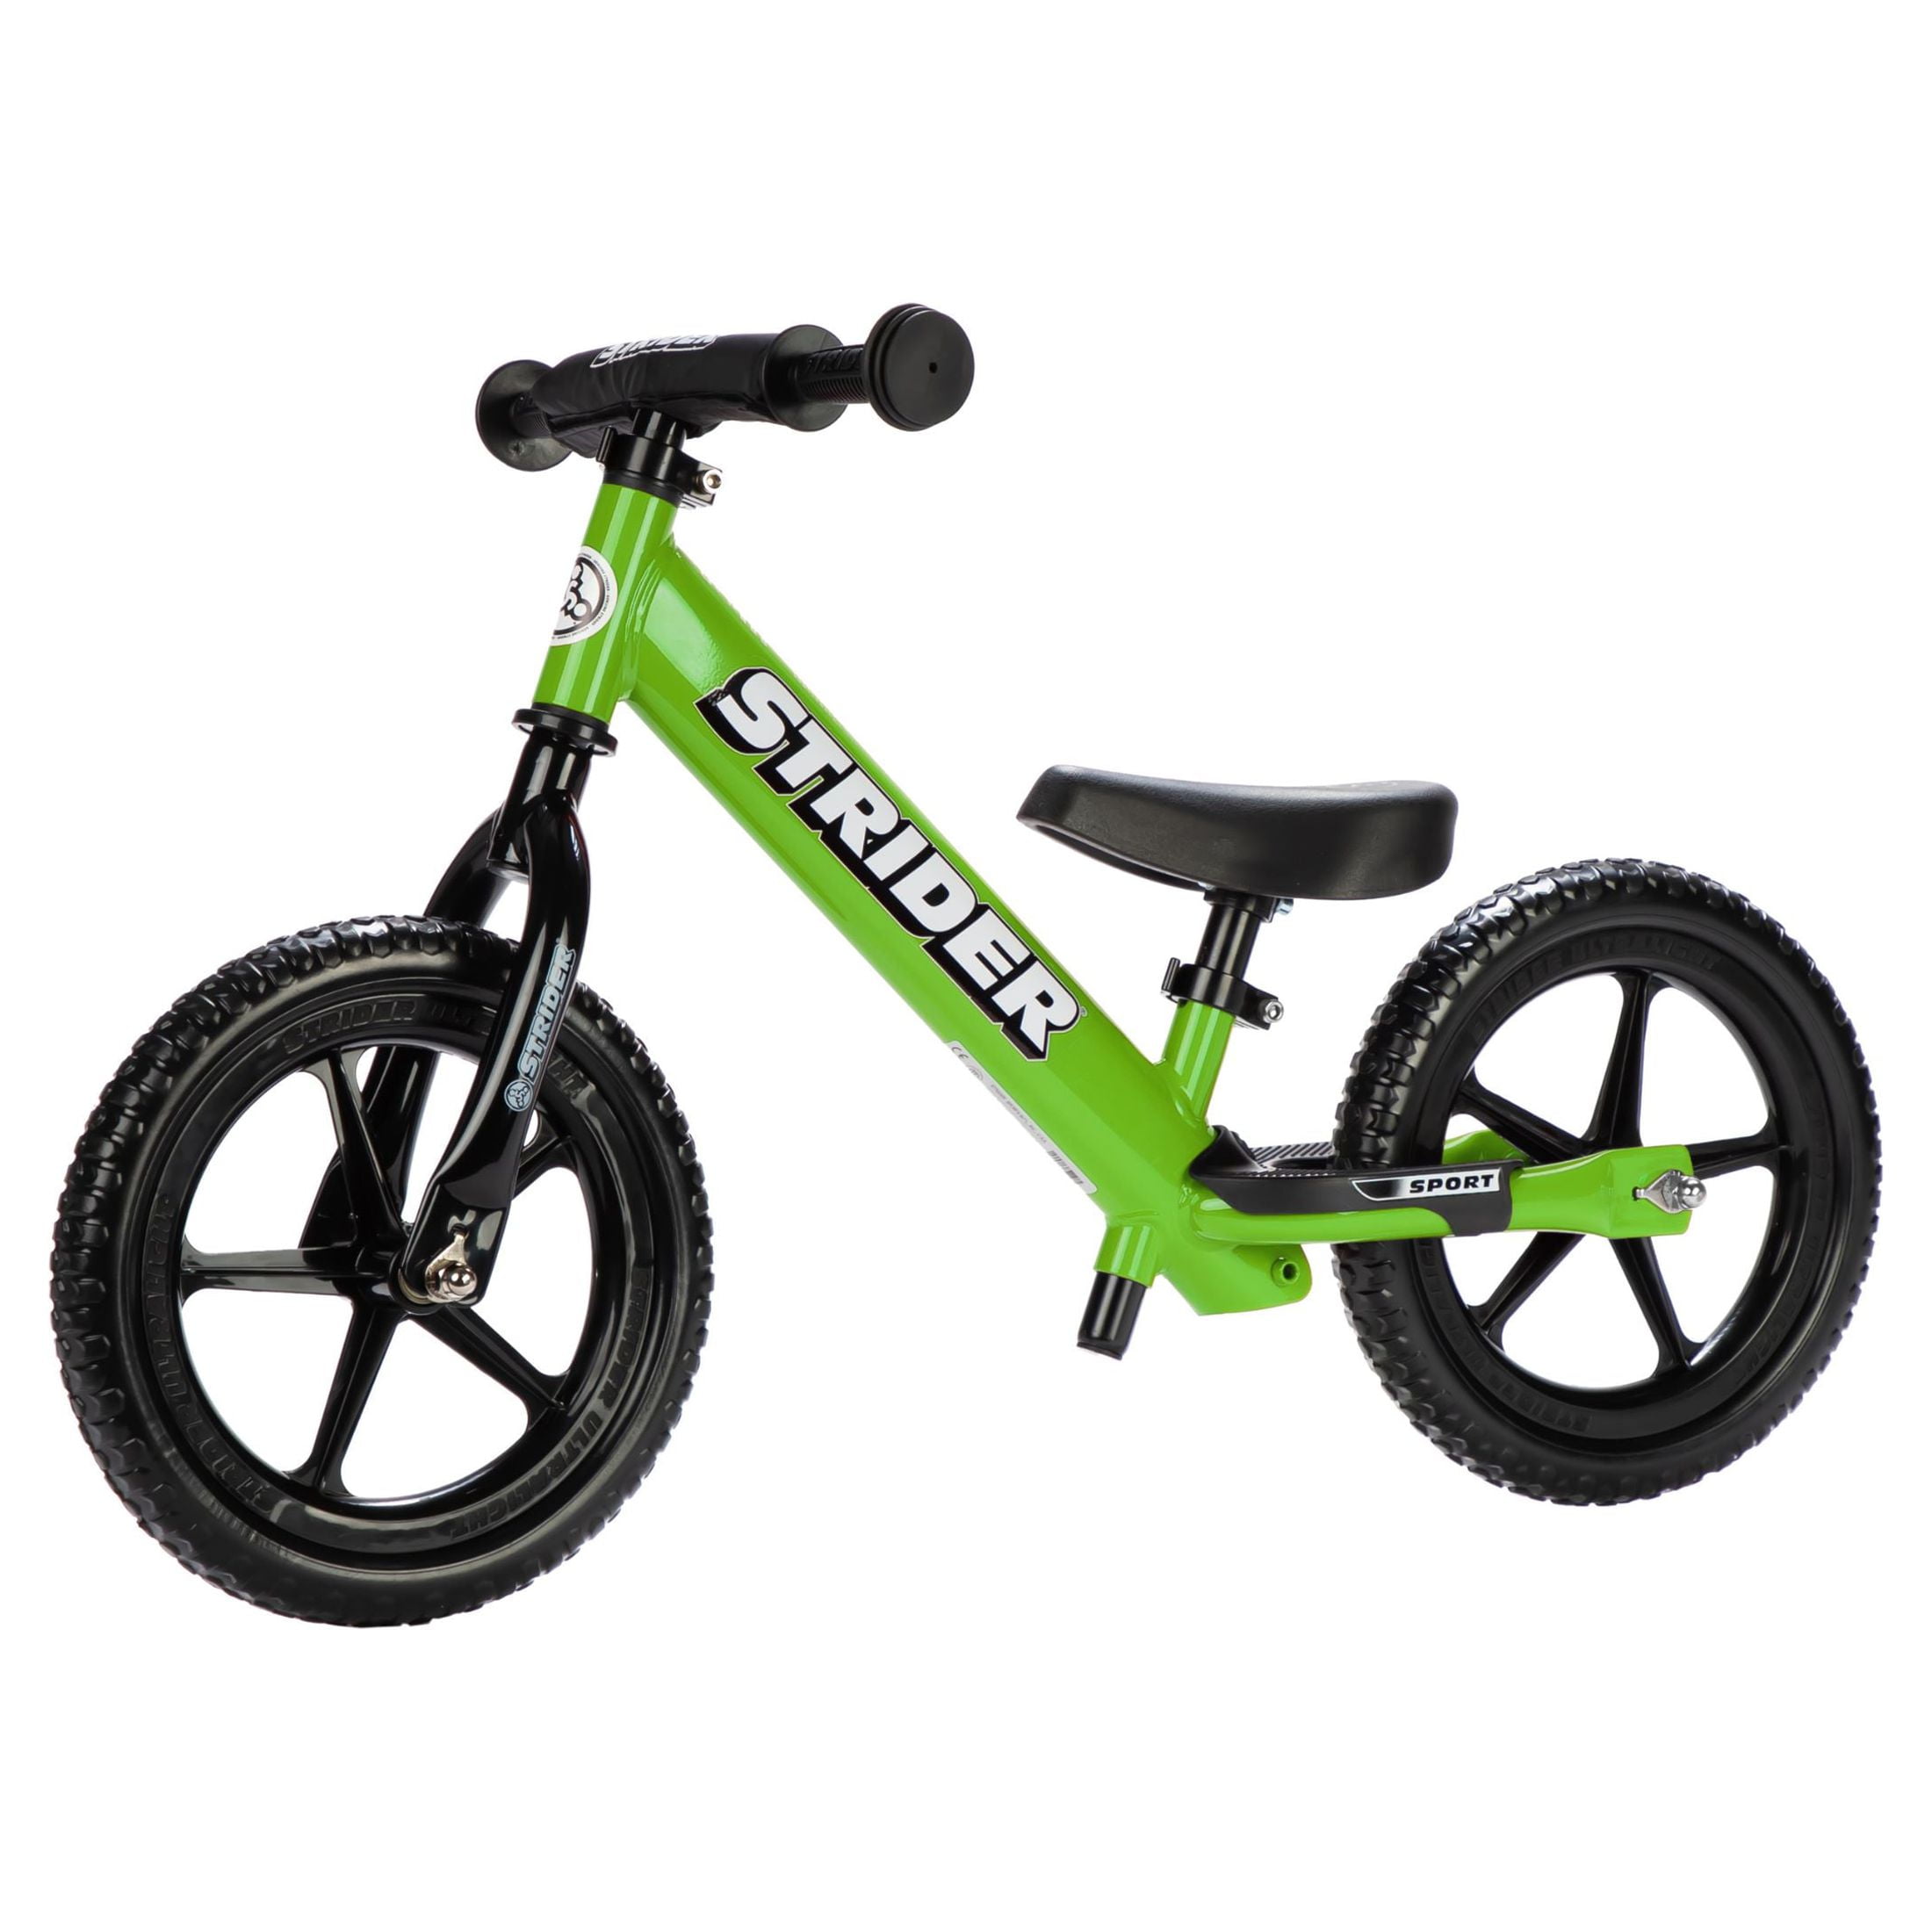 Strider - 12 Sport Balance Bike, Ages 18 Months to 5 Years - Green - image 1 of 14